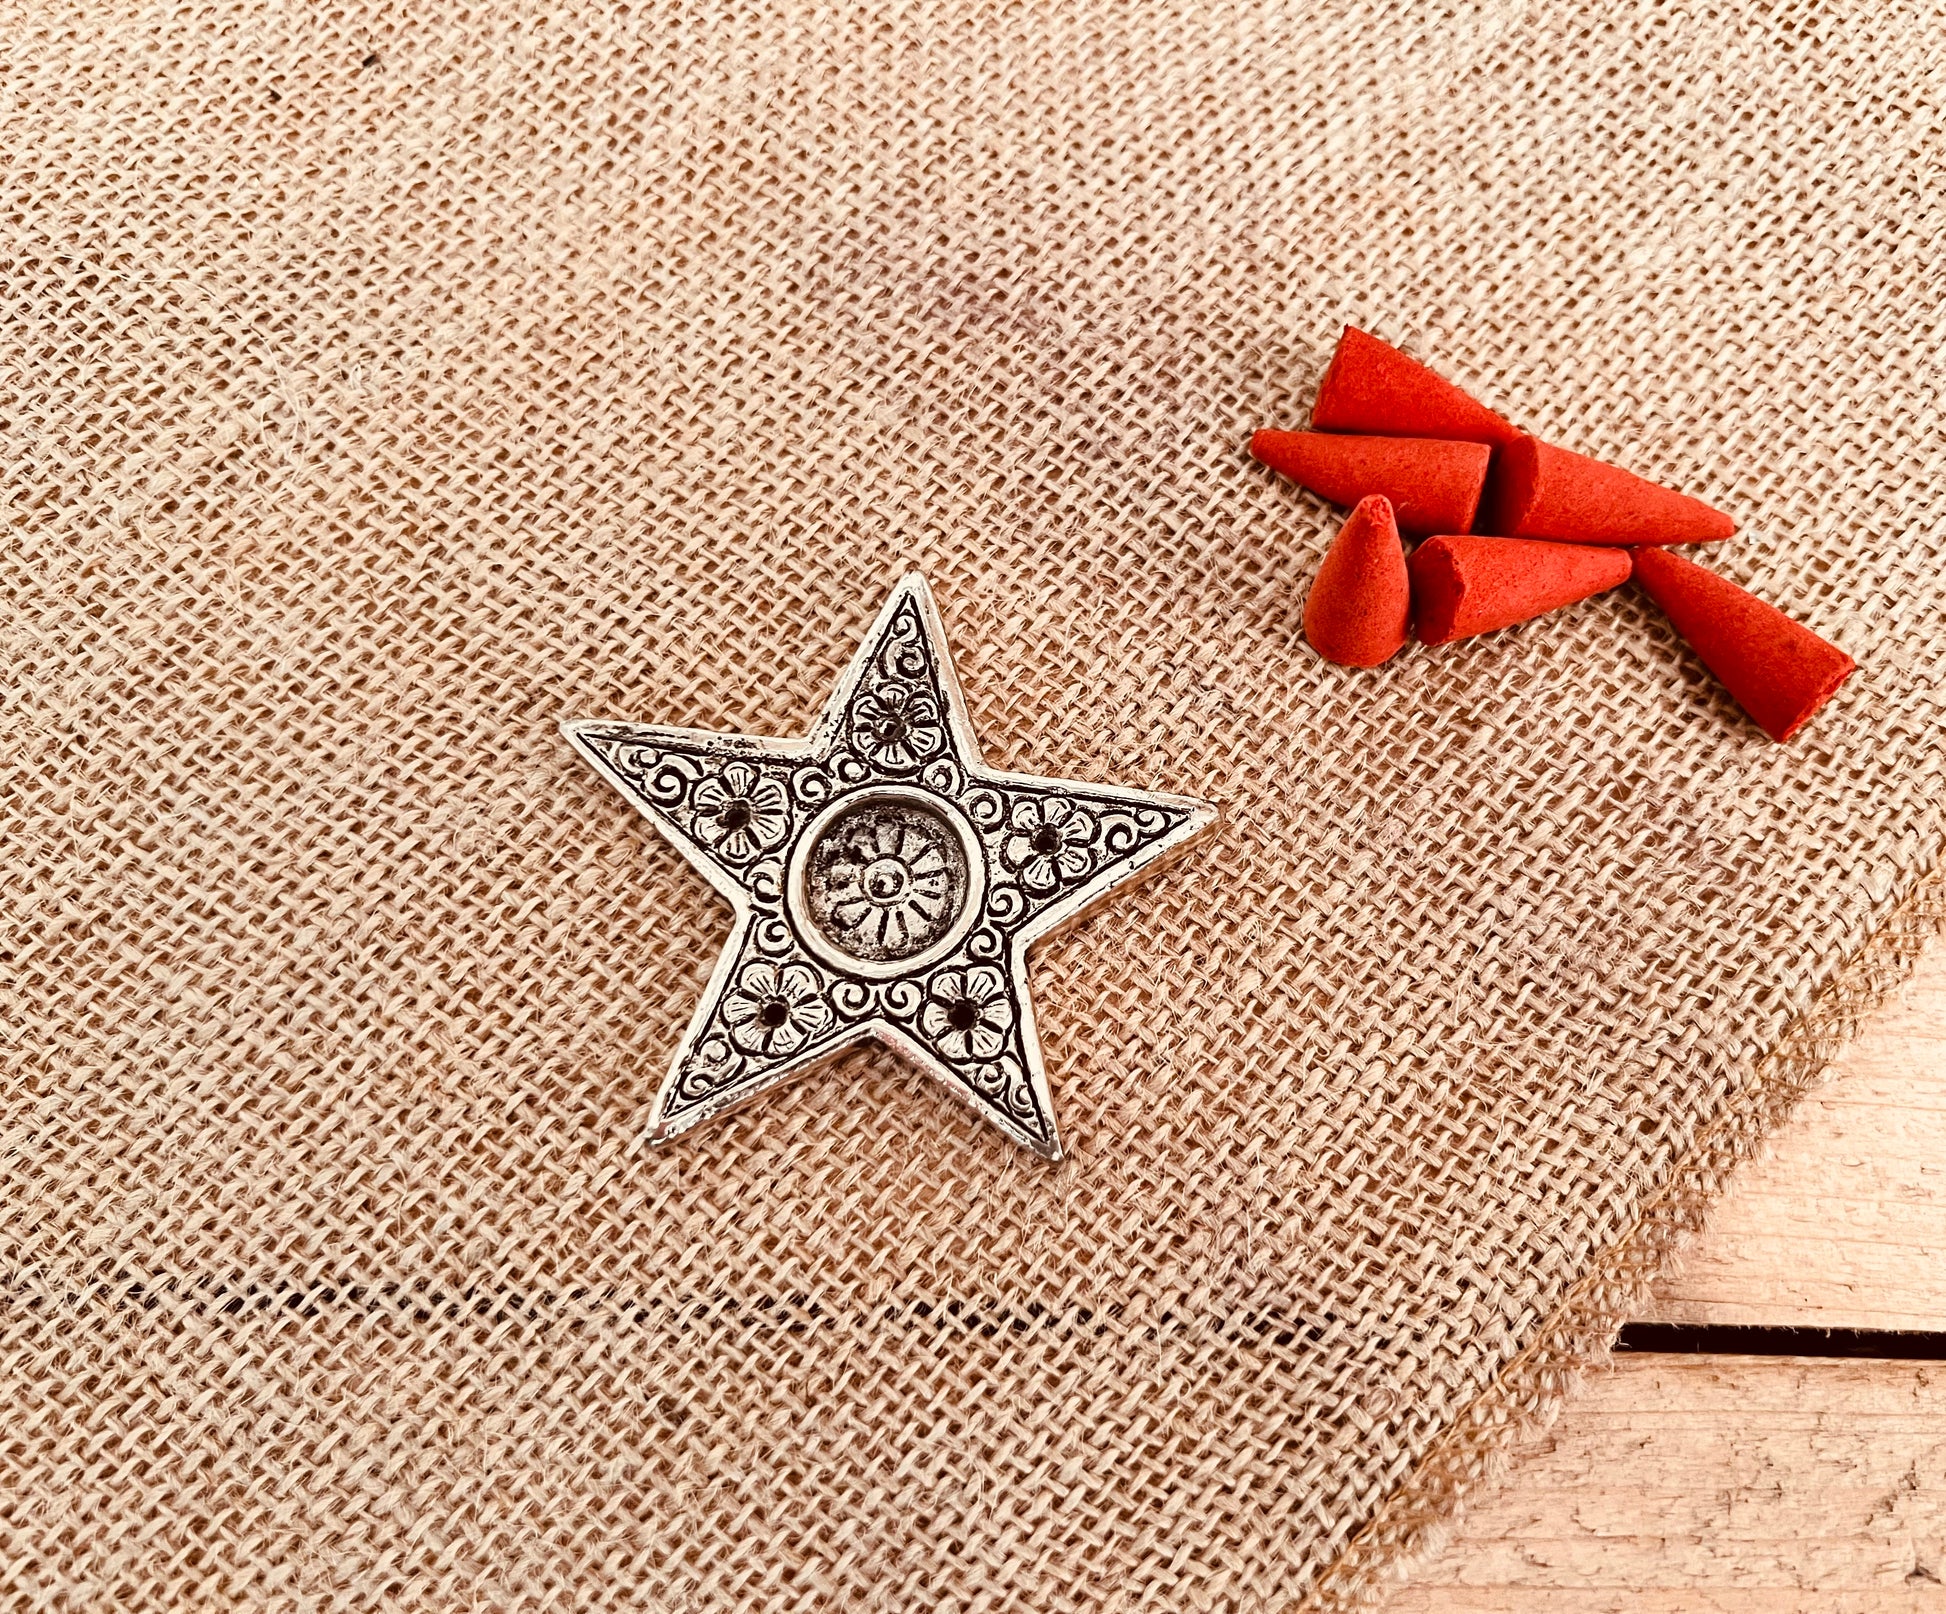 Small metal star incense holder